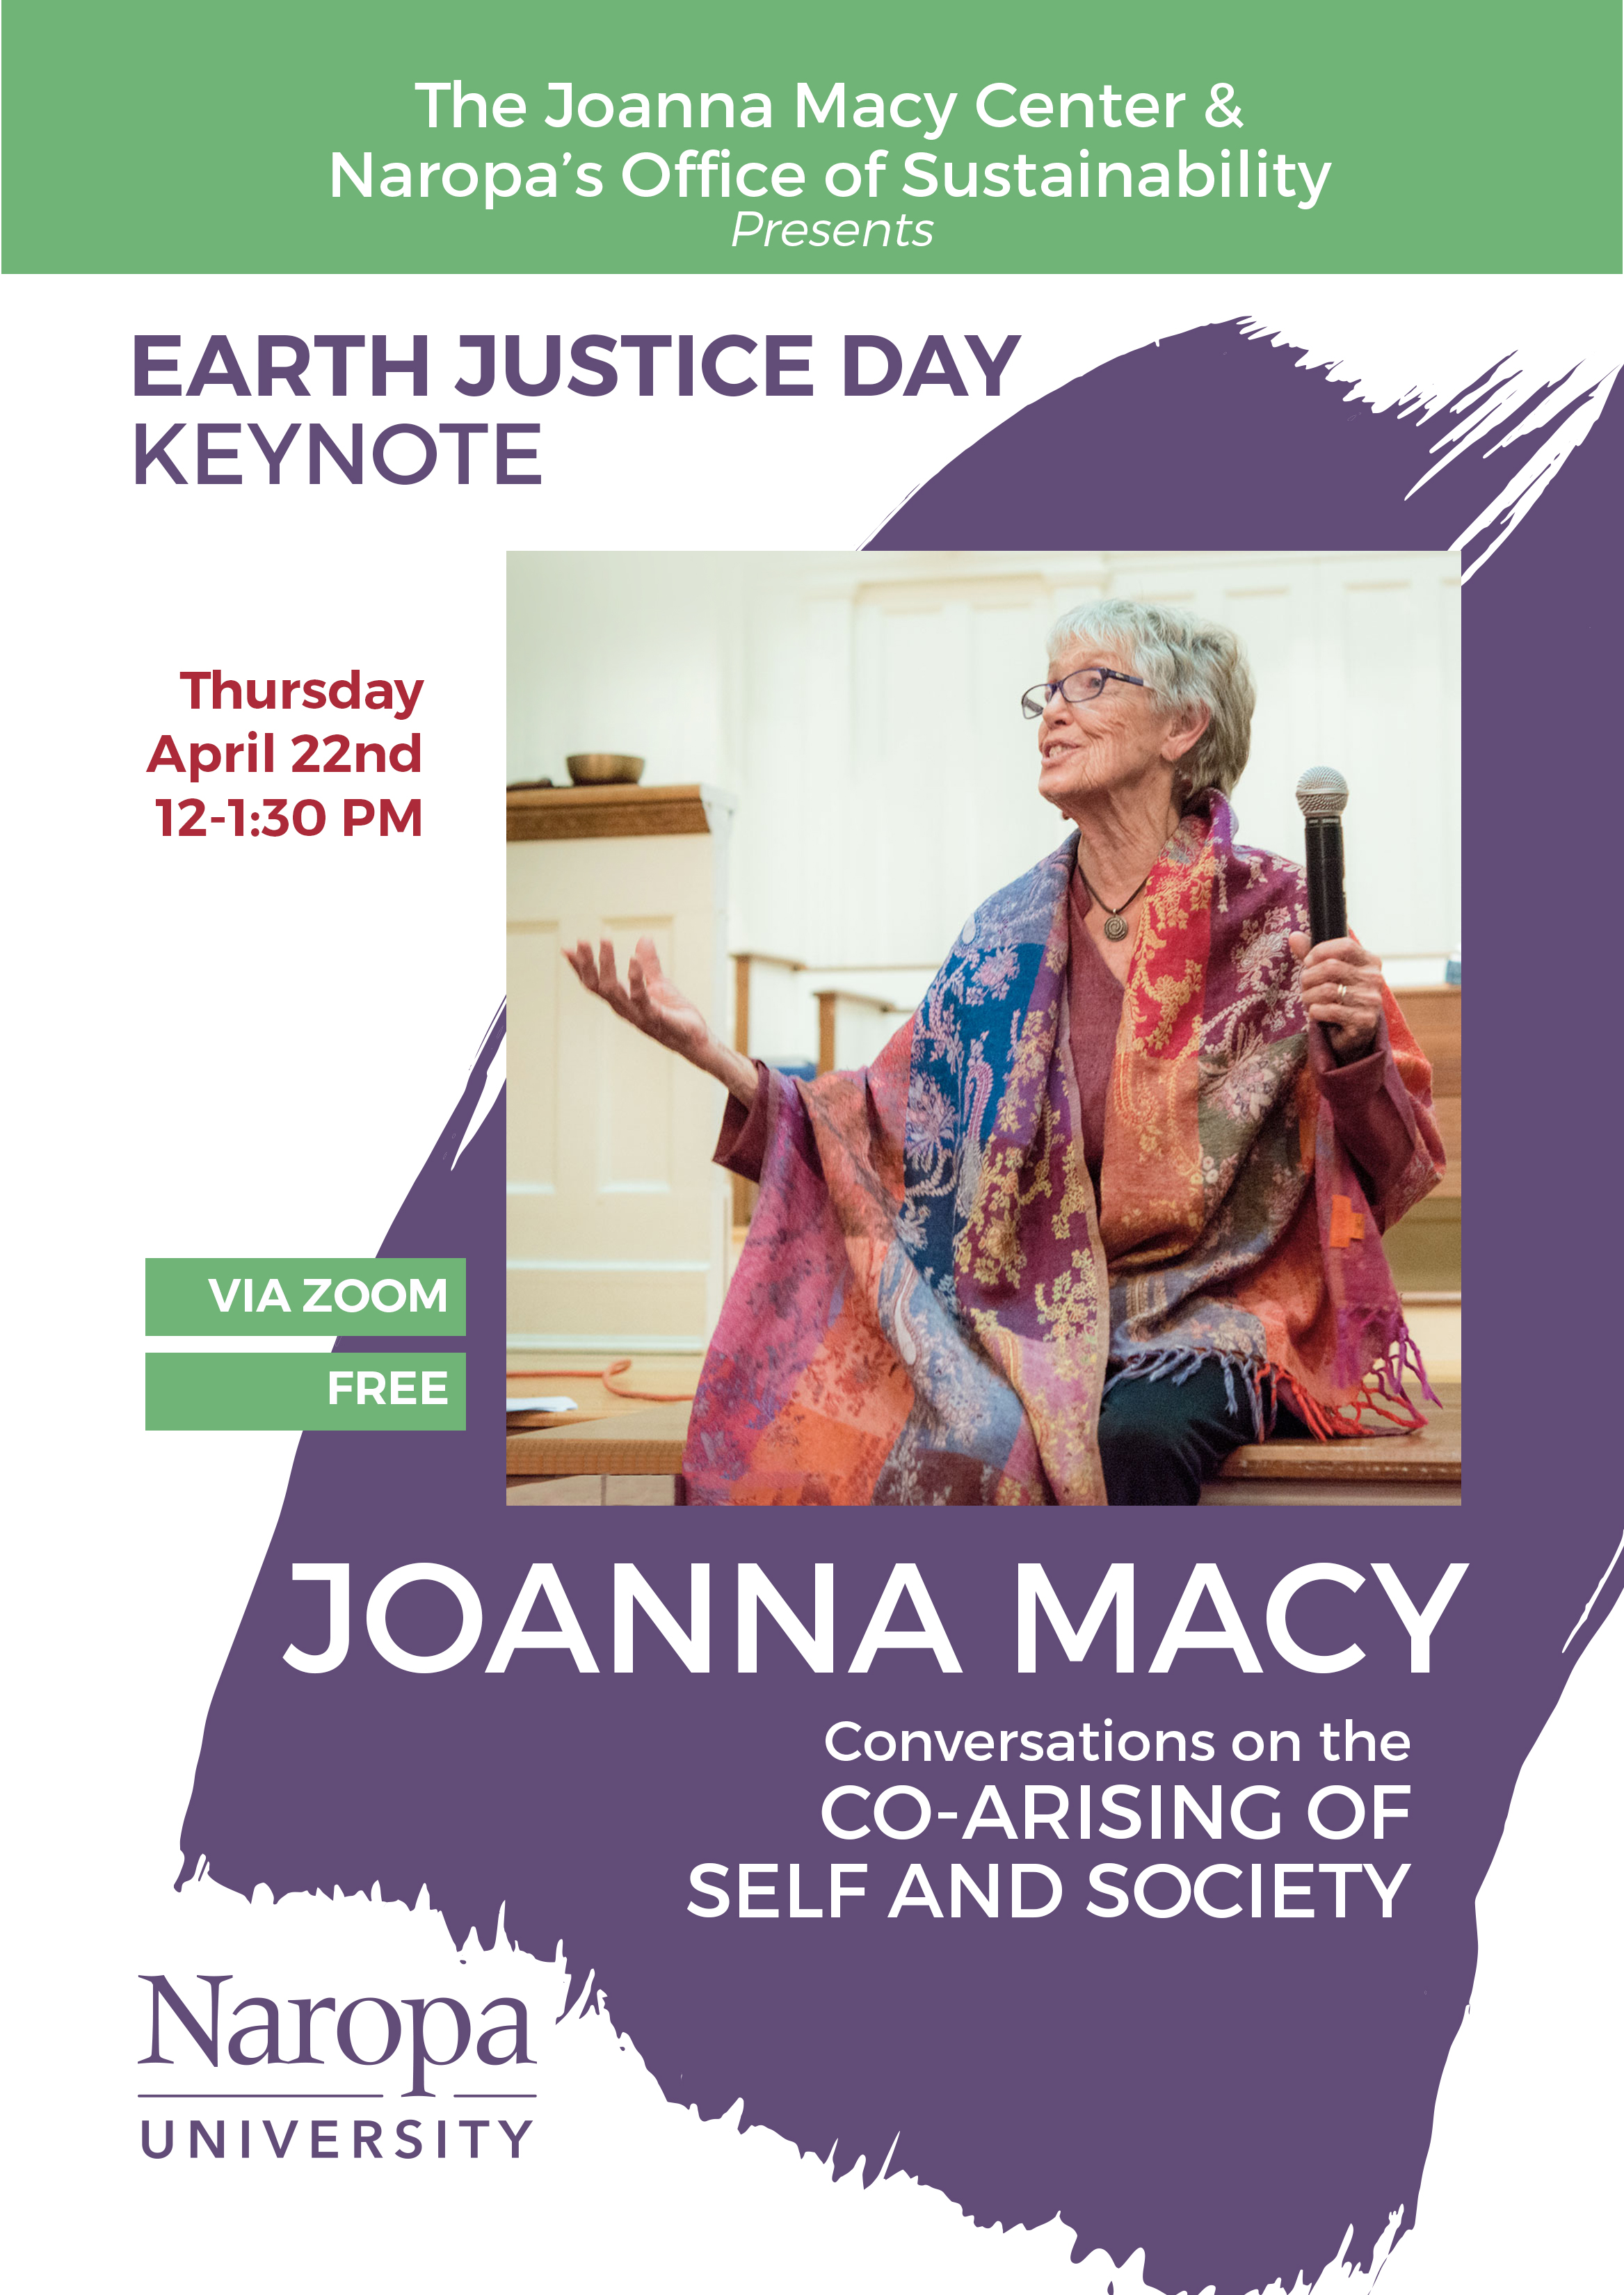 Be sure to attend Joanna Macy's presentation, “Conversations on the Co-Arising of Self and Society,” on Thursday, April 22nd at Noon.